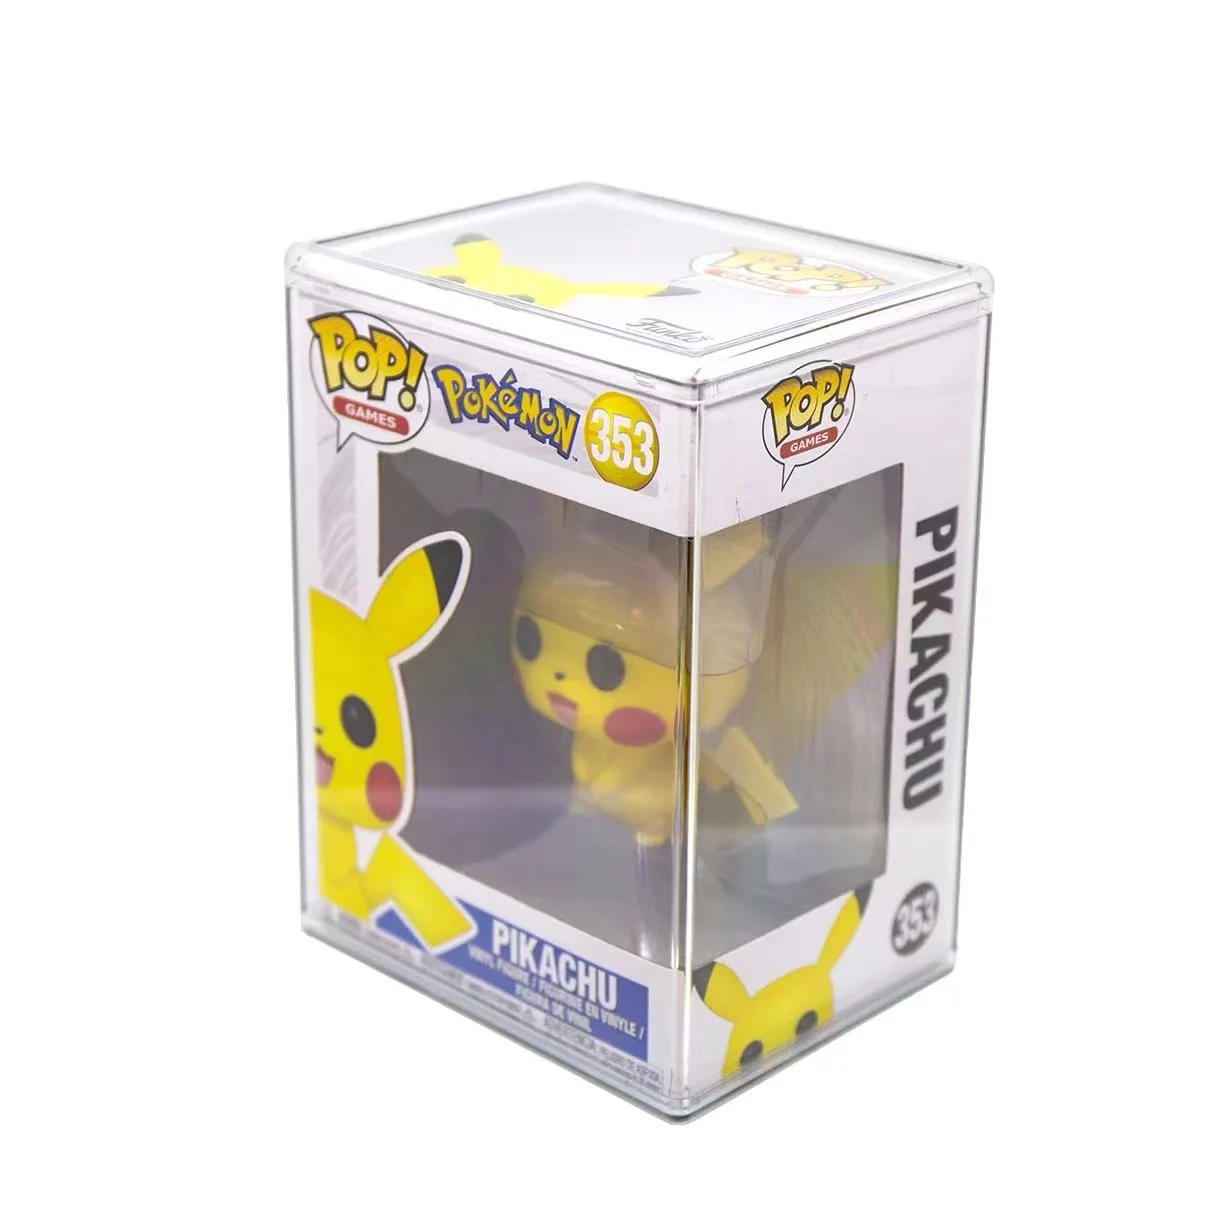 Custom Pop Case For Toy Packaging Box - Buy Funko Pop Protector Case With Interlocking Lid,Clear Funko Pop Funko Pop Protector Product Alibaba.com